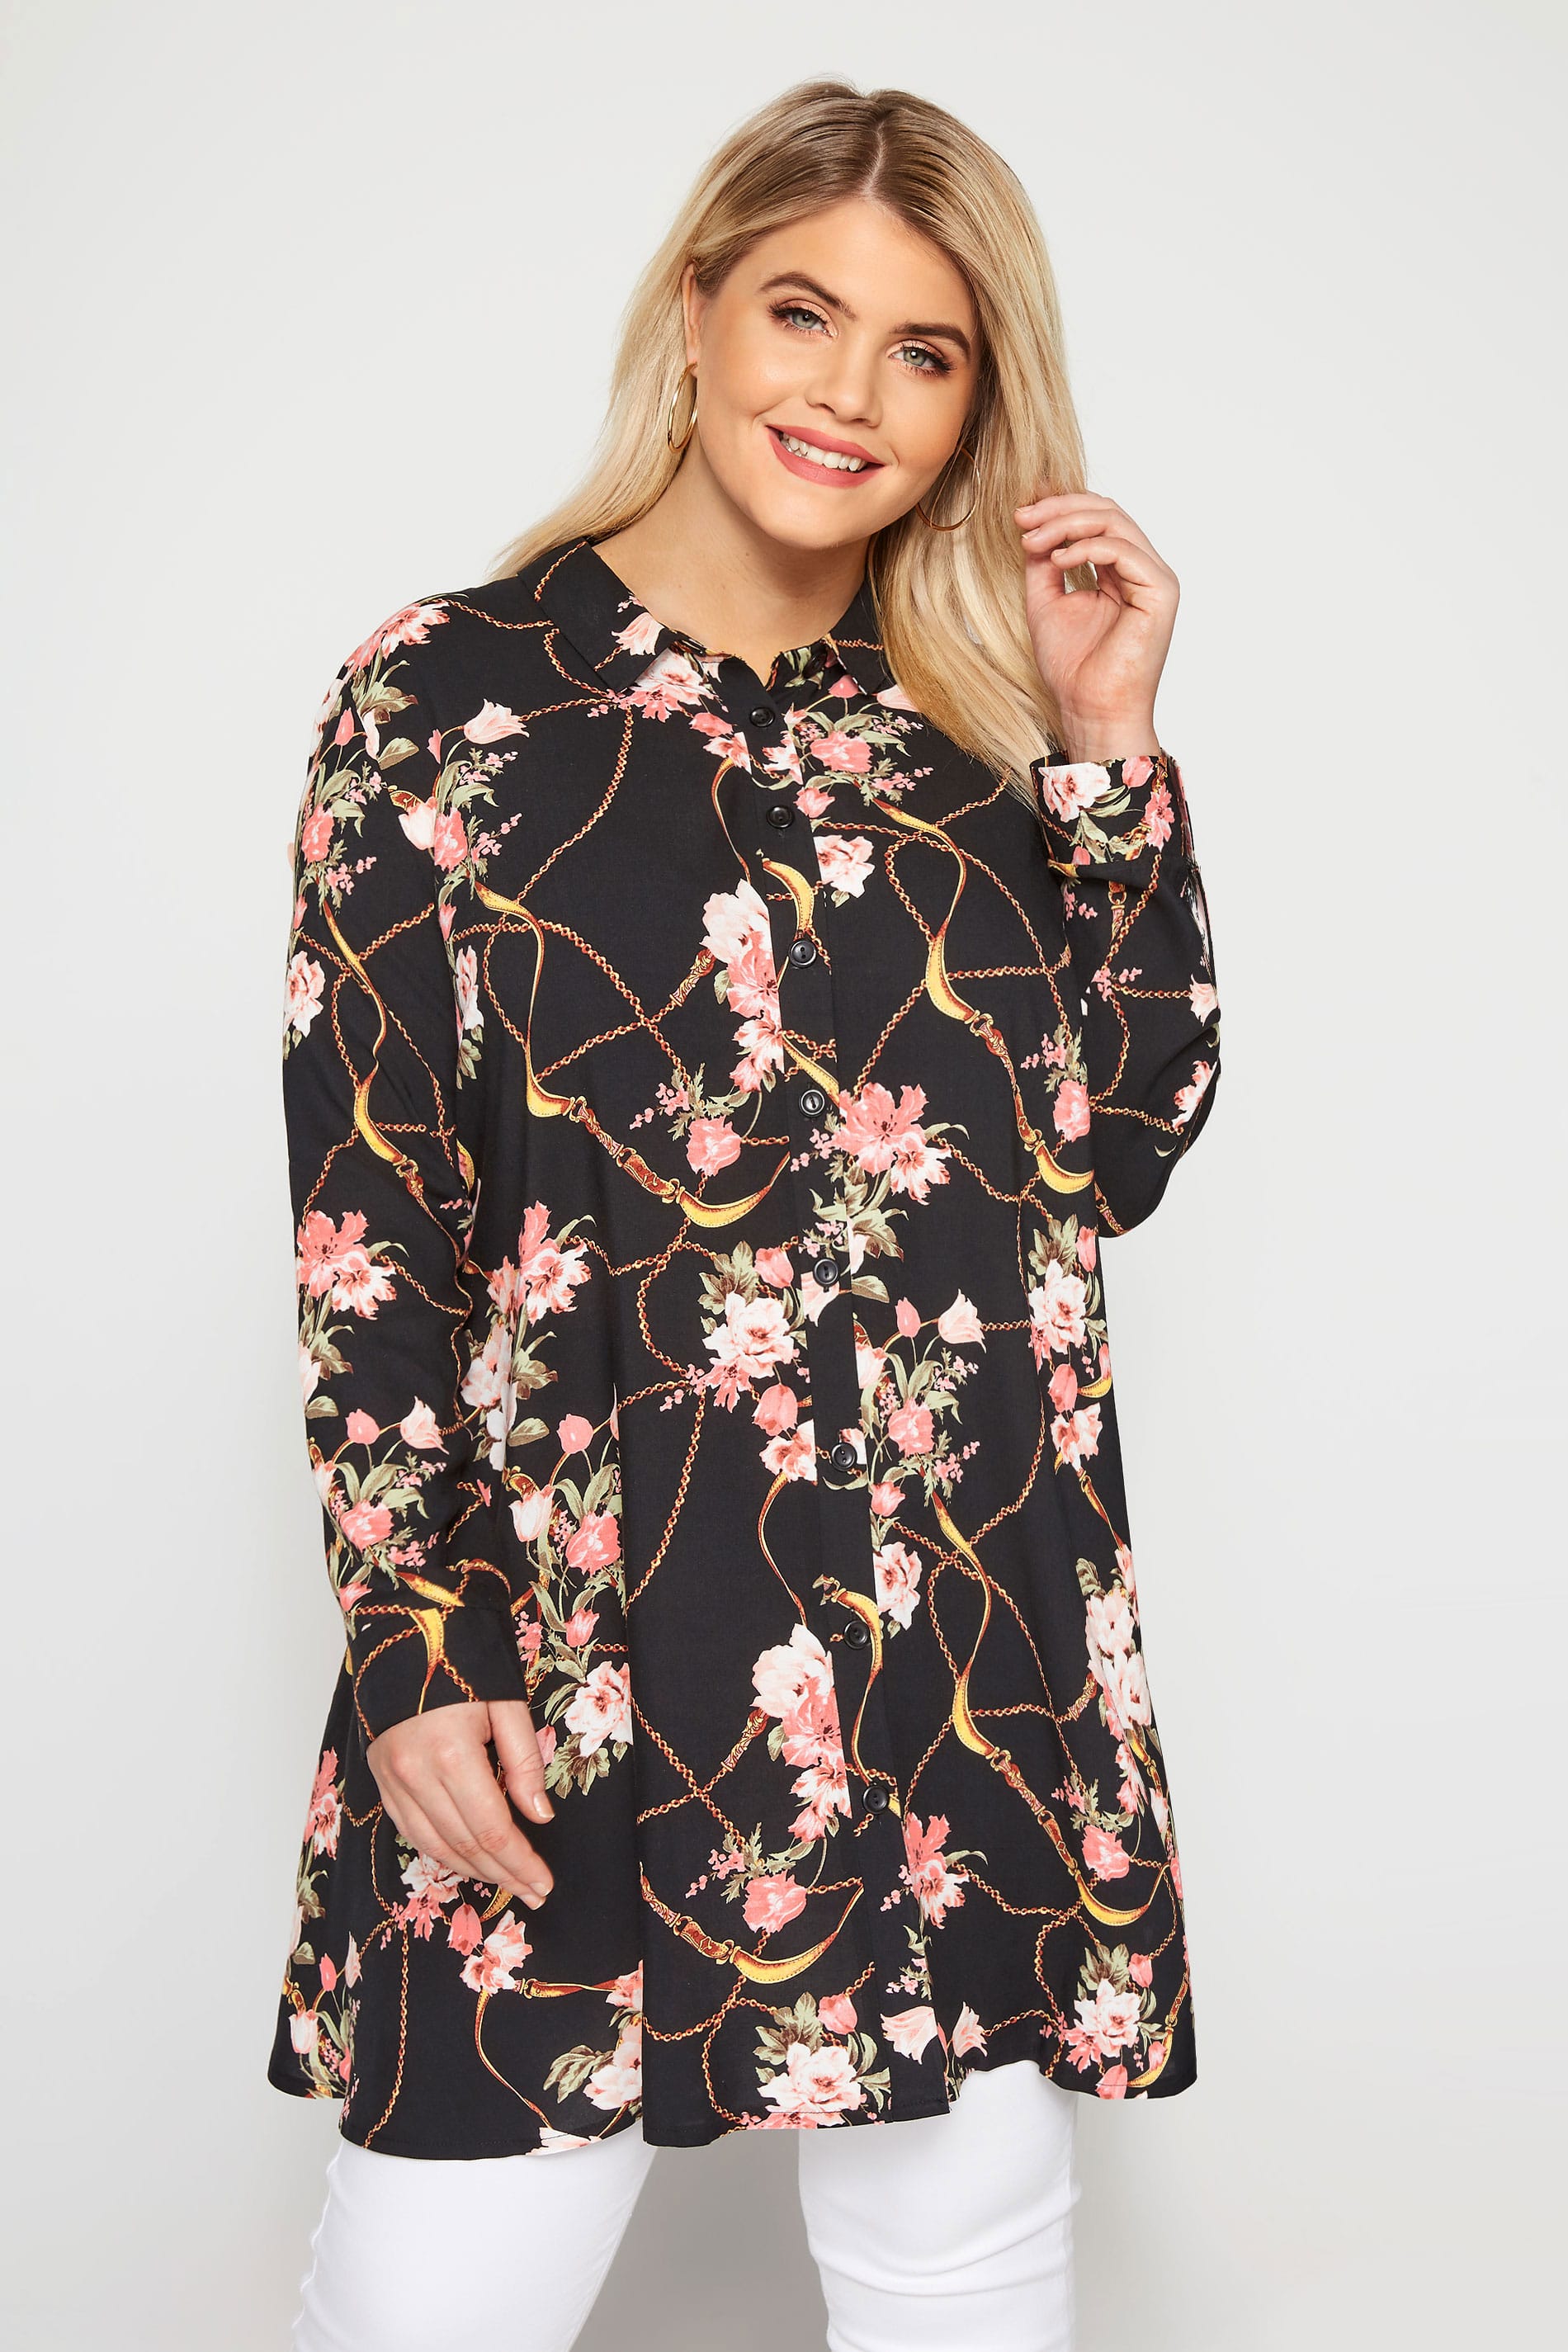 Black Floral Chain Mix Shirt | Sizes 16 to 36 | Yours Clothing